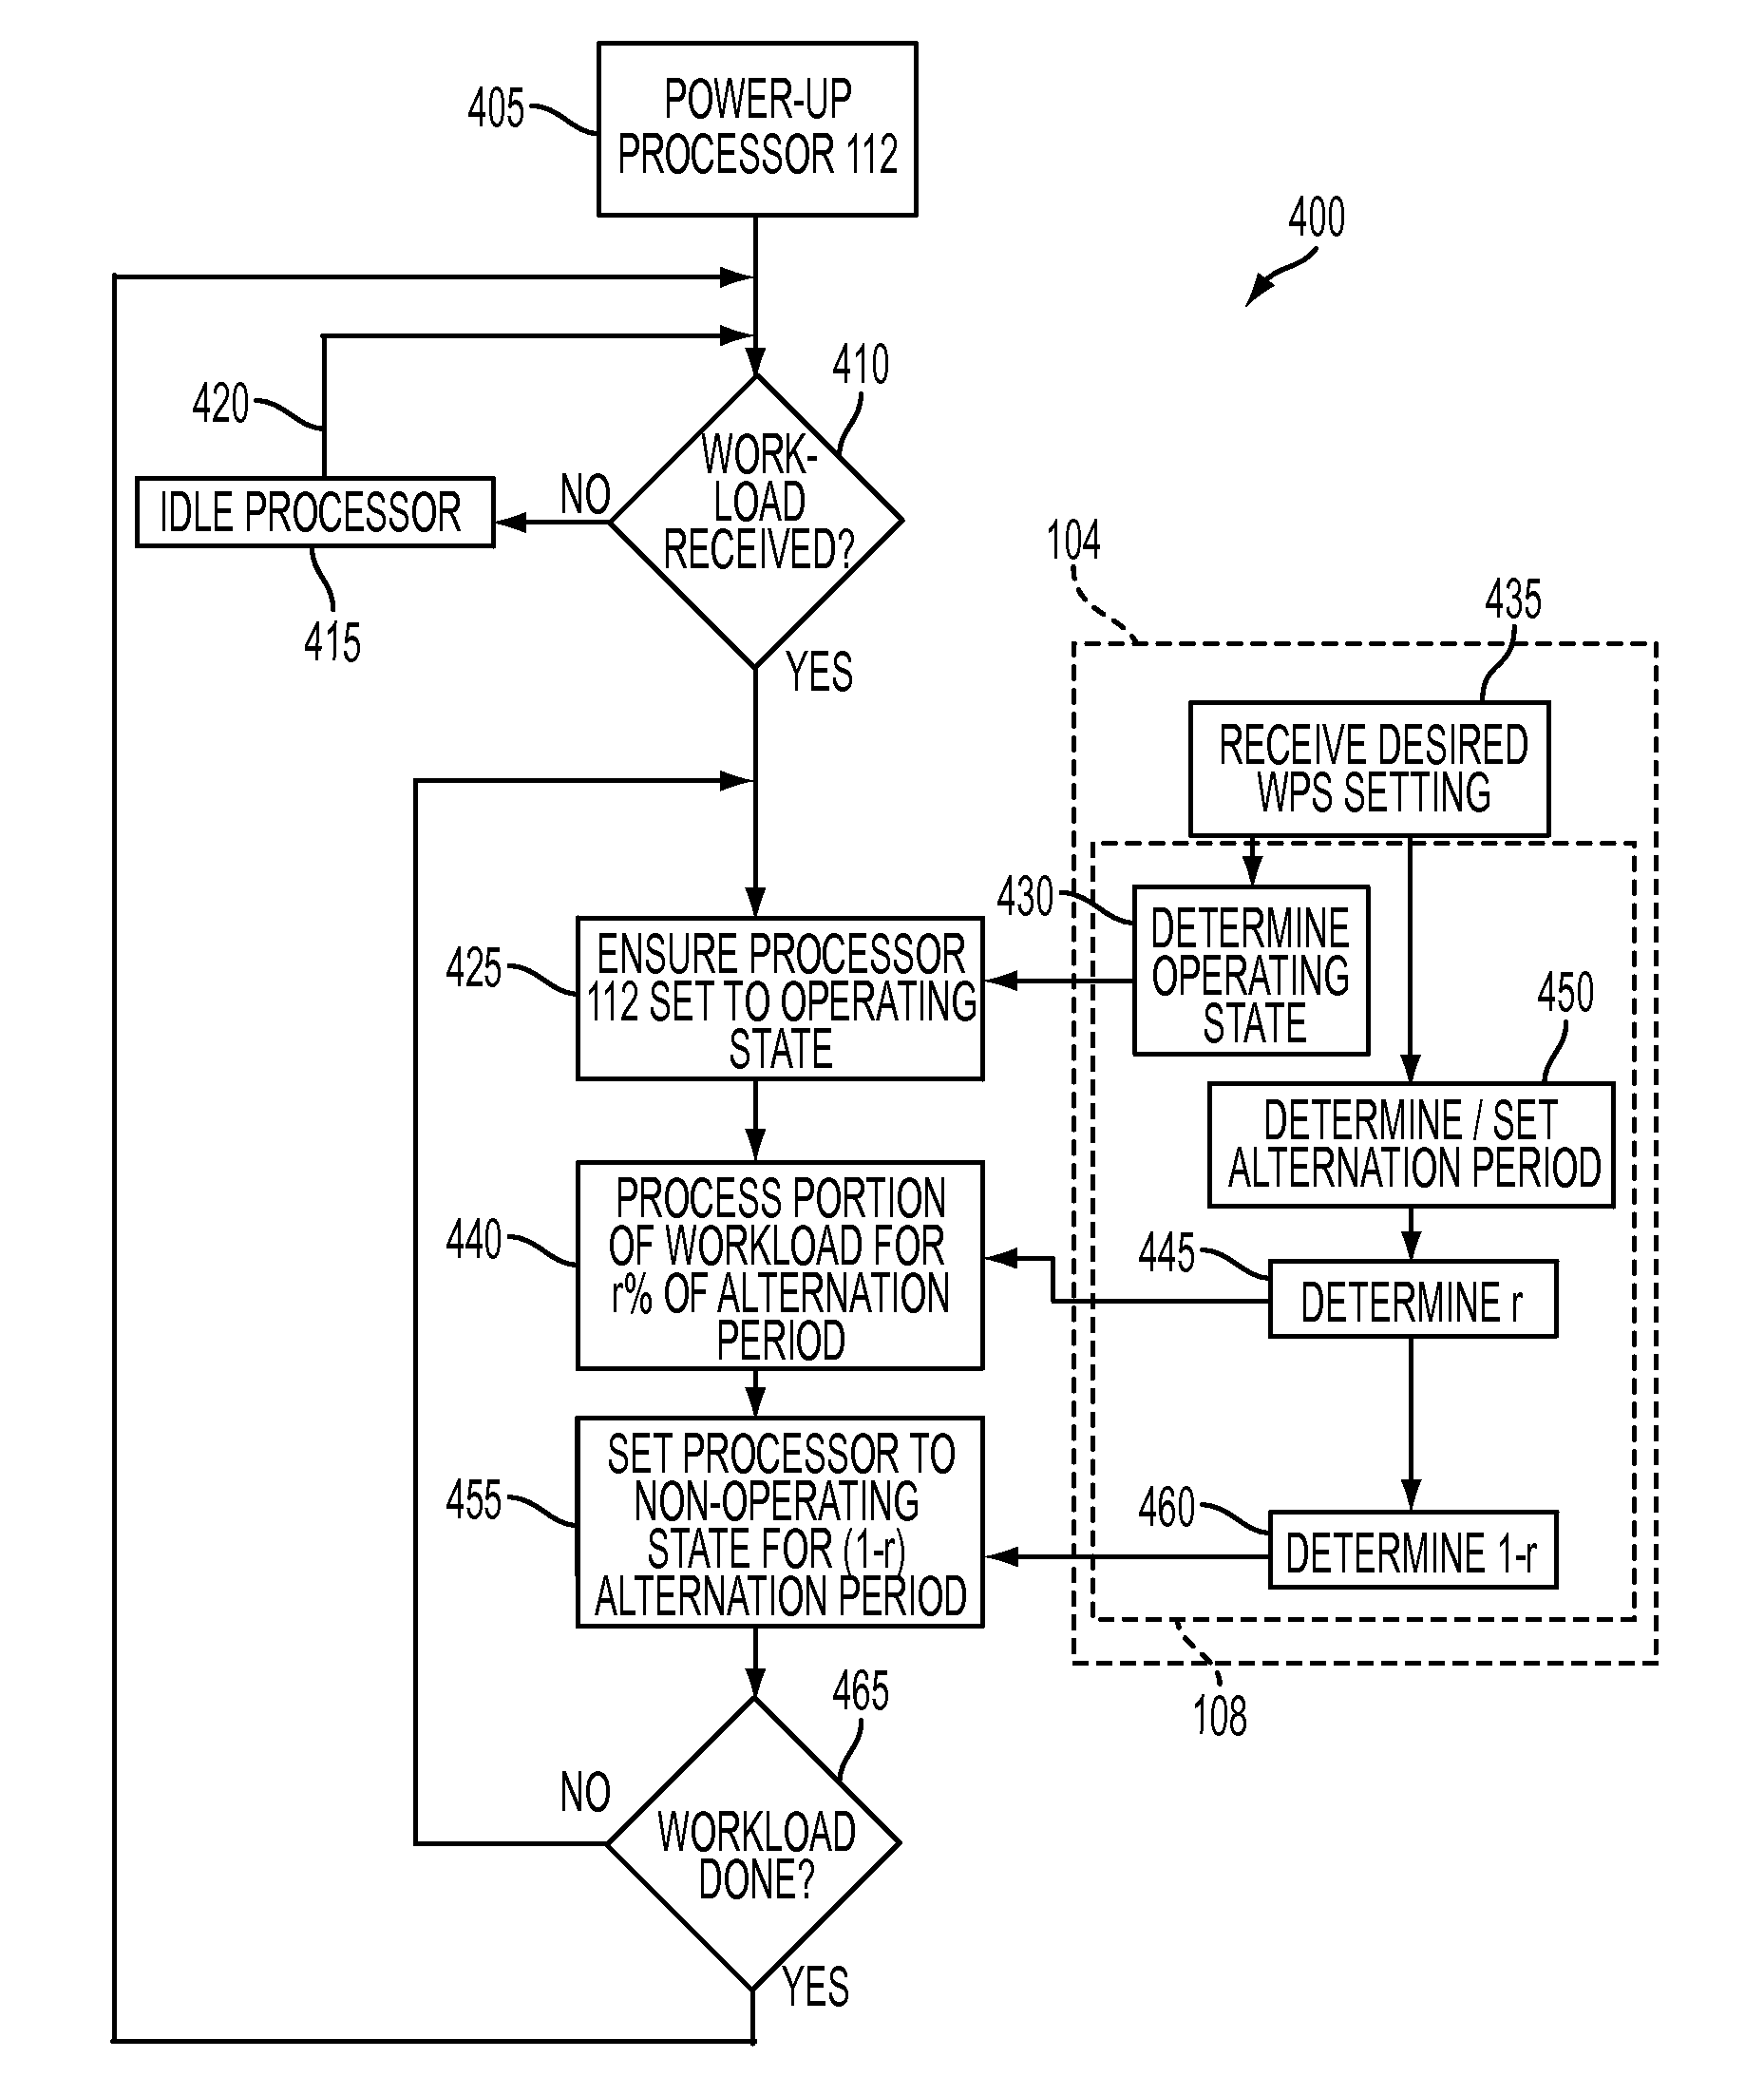 Systems and Methods for Managing Power Consumption and Performance of a Processor